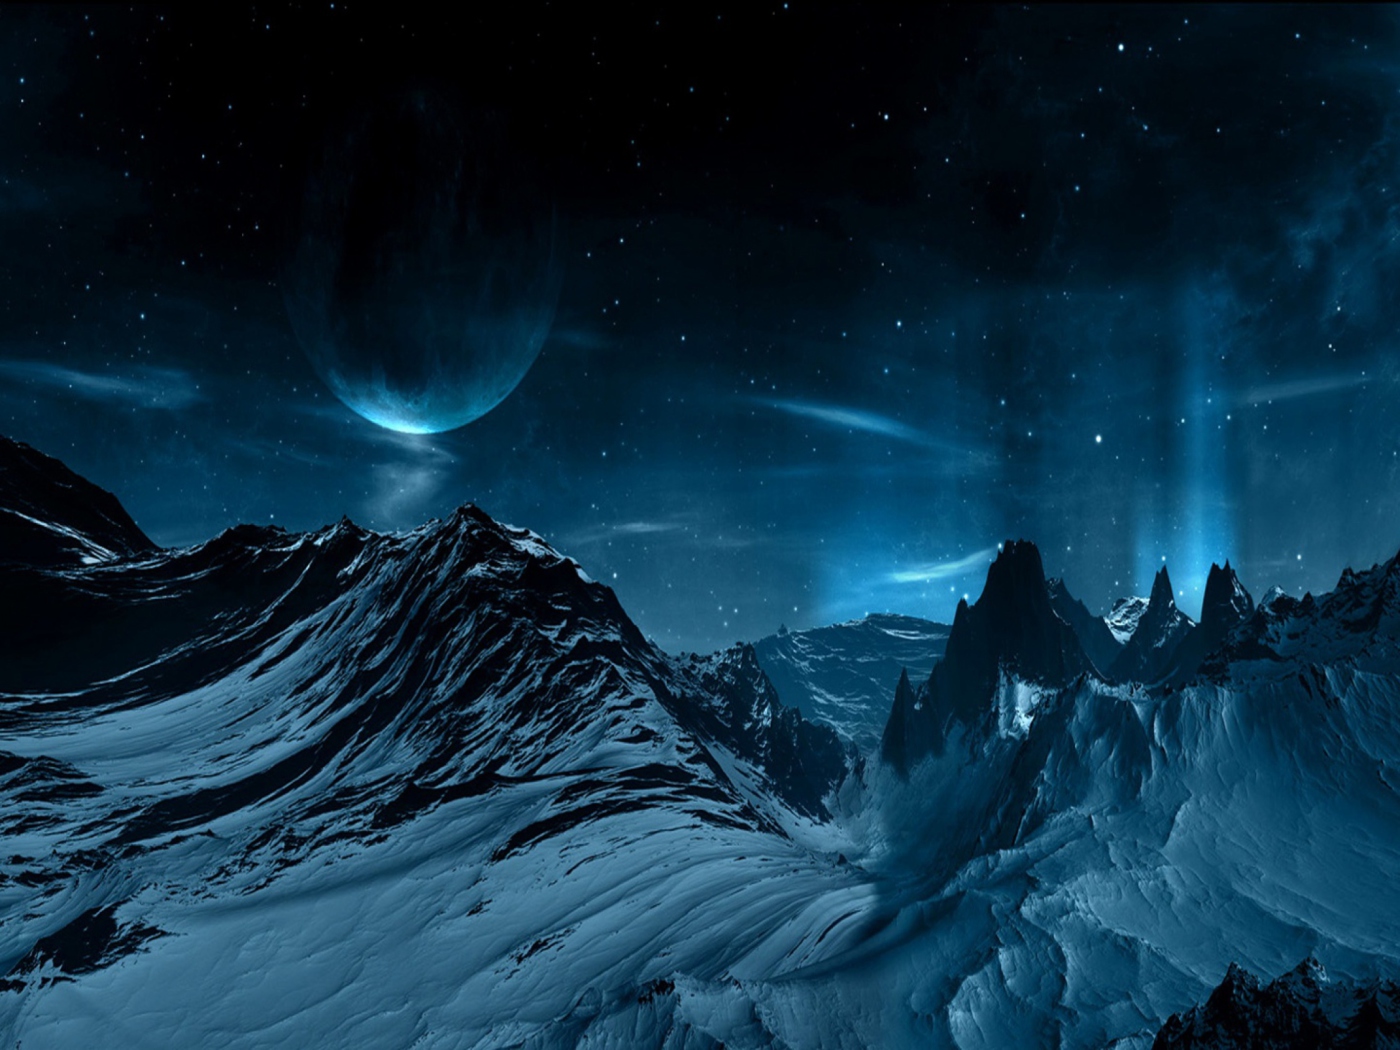 Blue Night And Mountainscape wallpaper 1400x1050